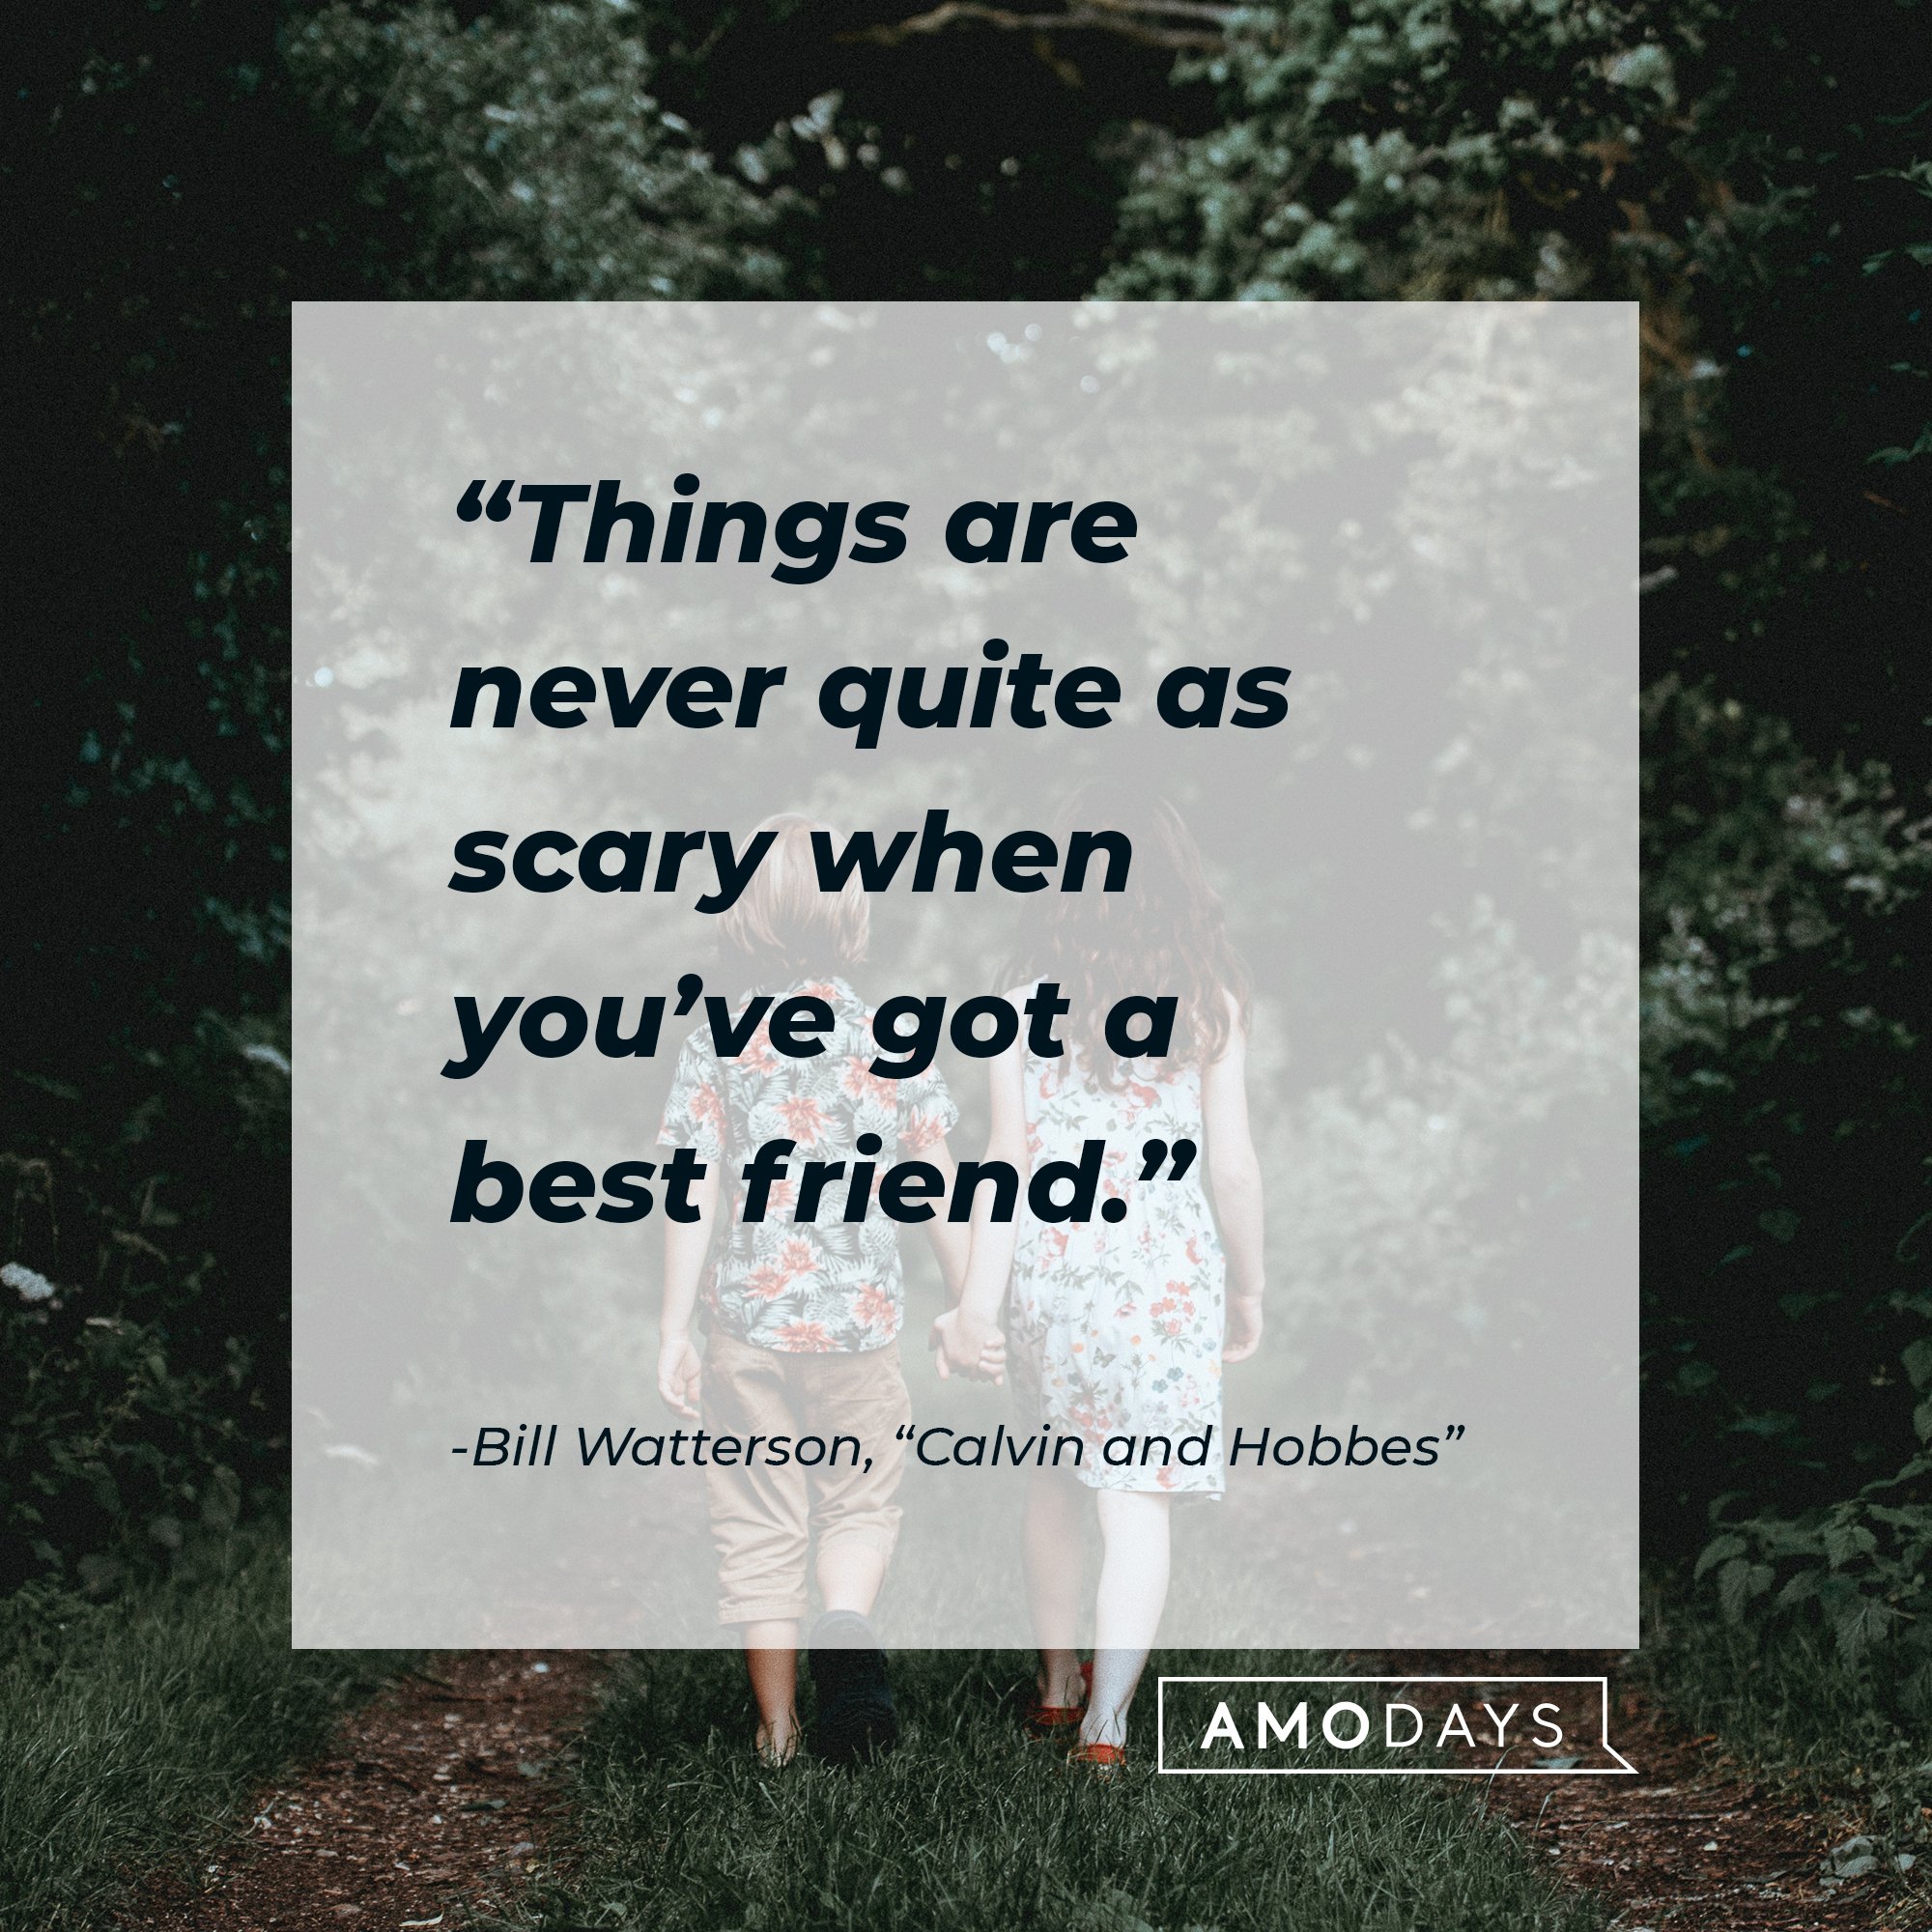 Bill Watterson’s quote: "Things are never quite as scary when you’ve got a best friend.” | Image: AmoDays 